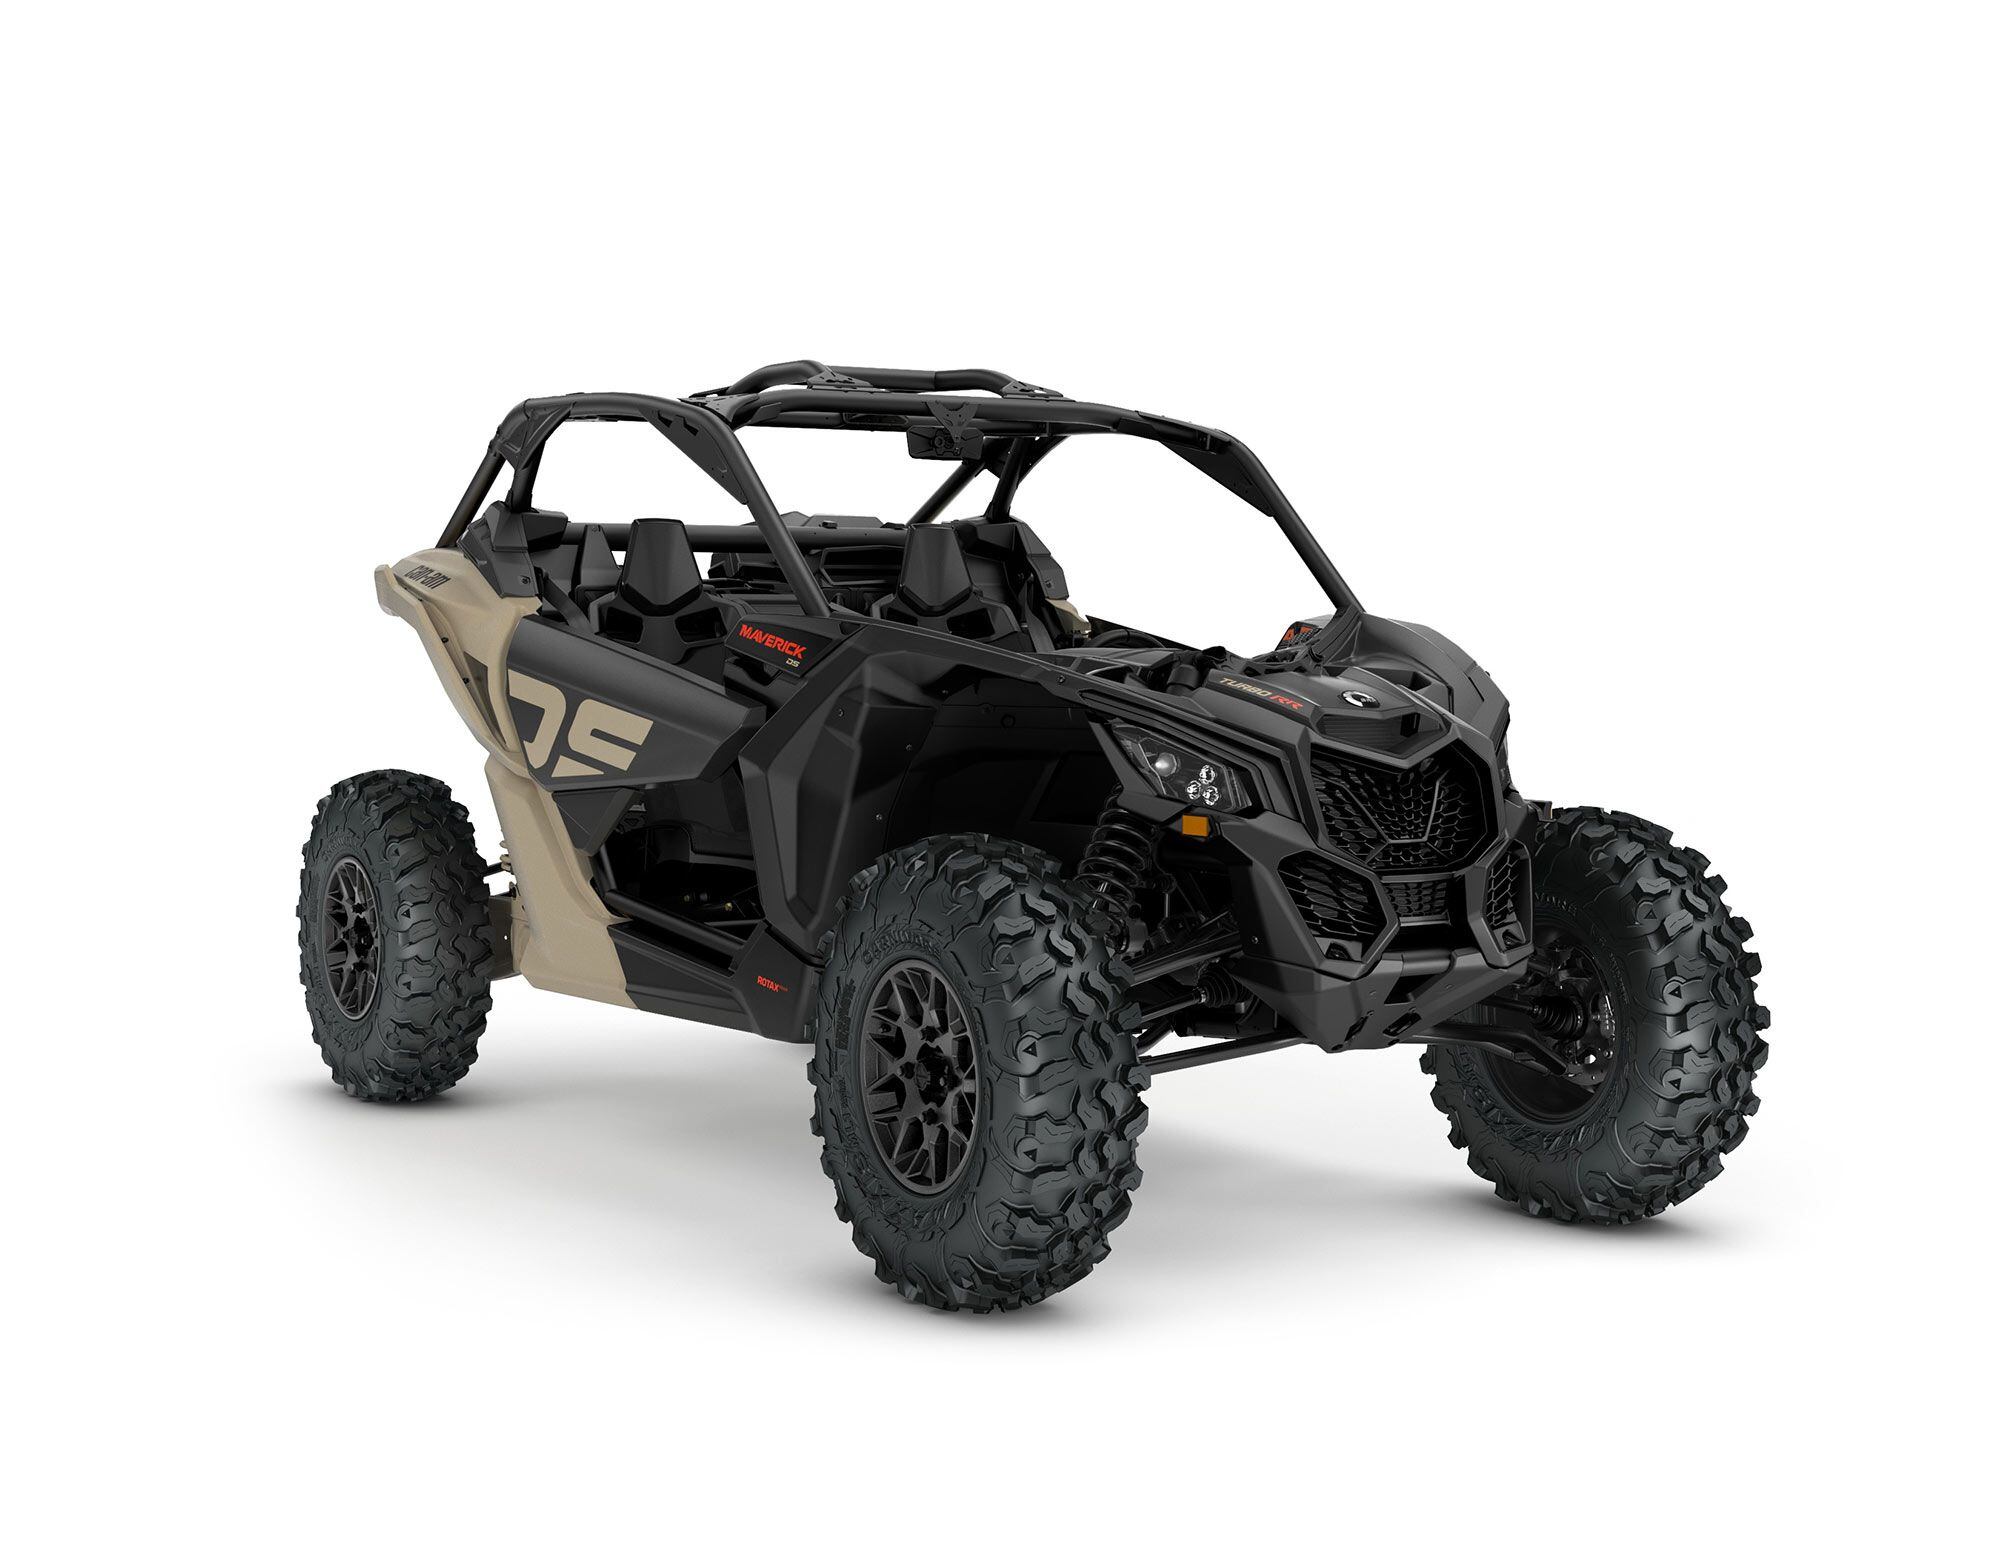 2022 Can-Am Maverick X3 X DS Turbo RR front view in Desert Tan, Carbon Black and Can-Am Red color.